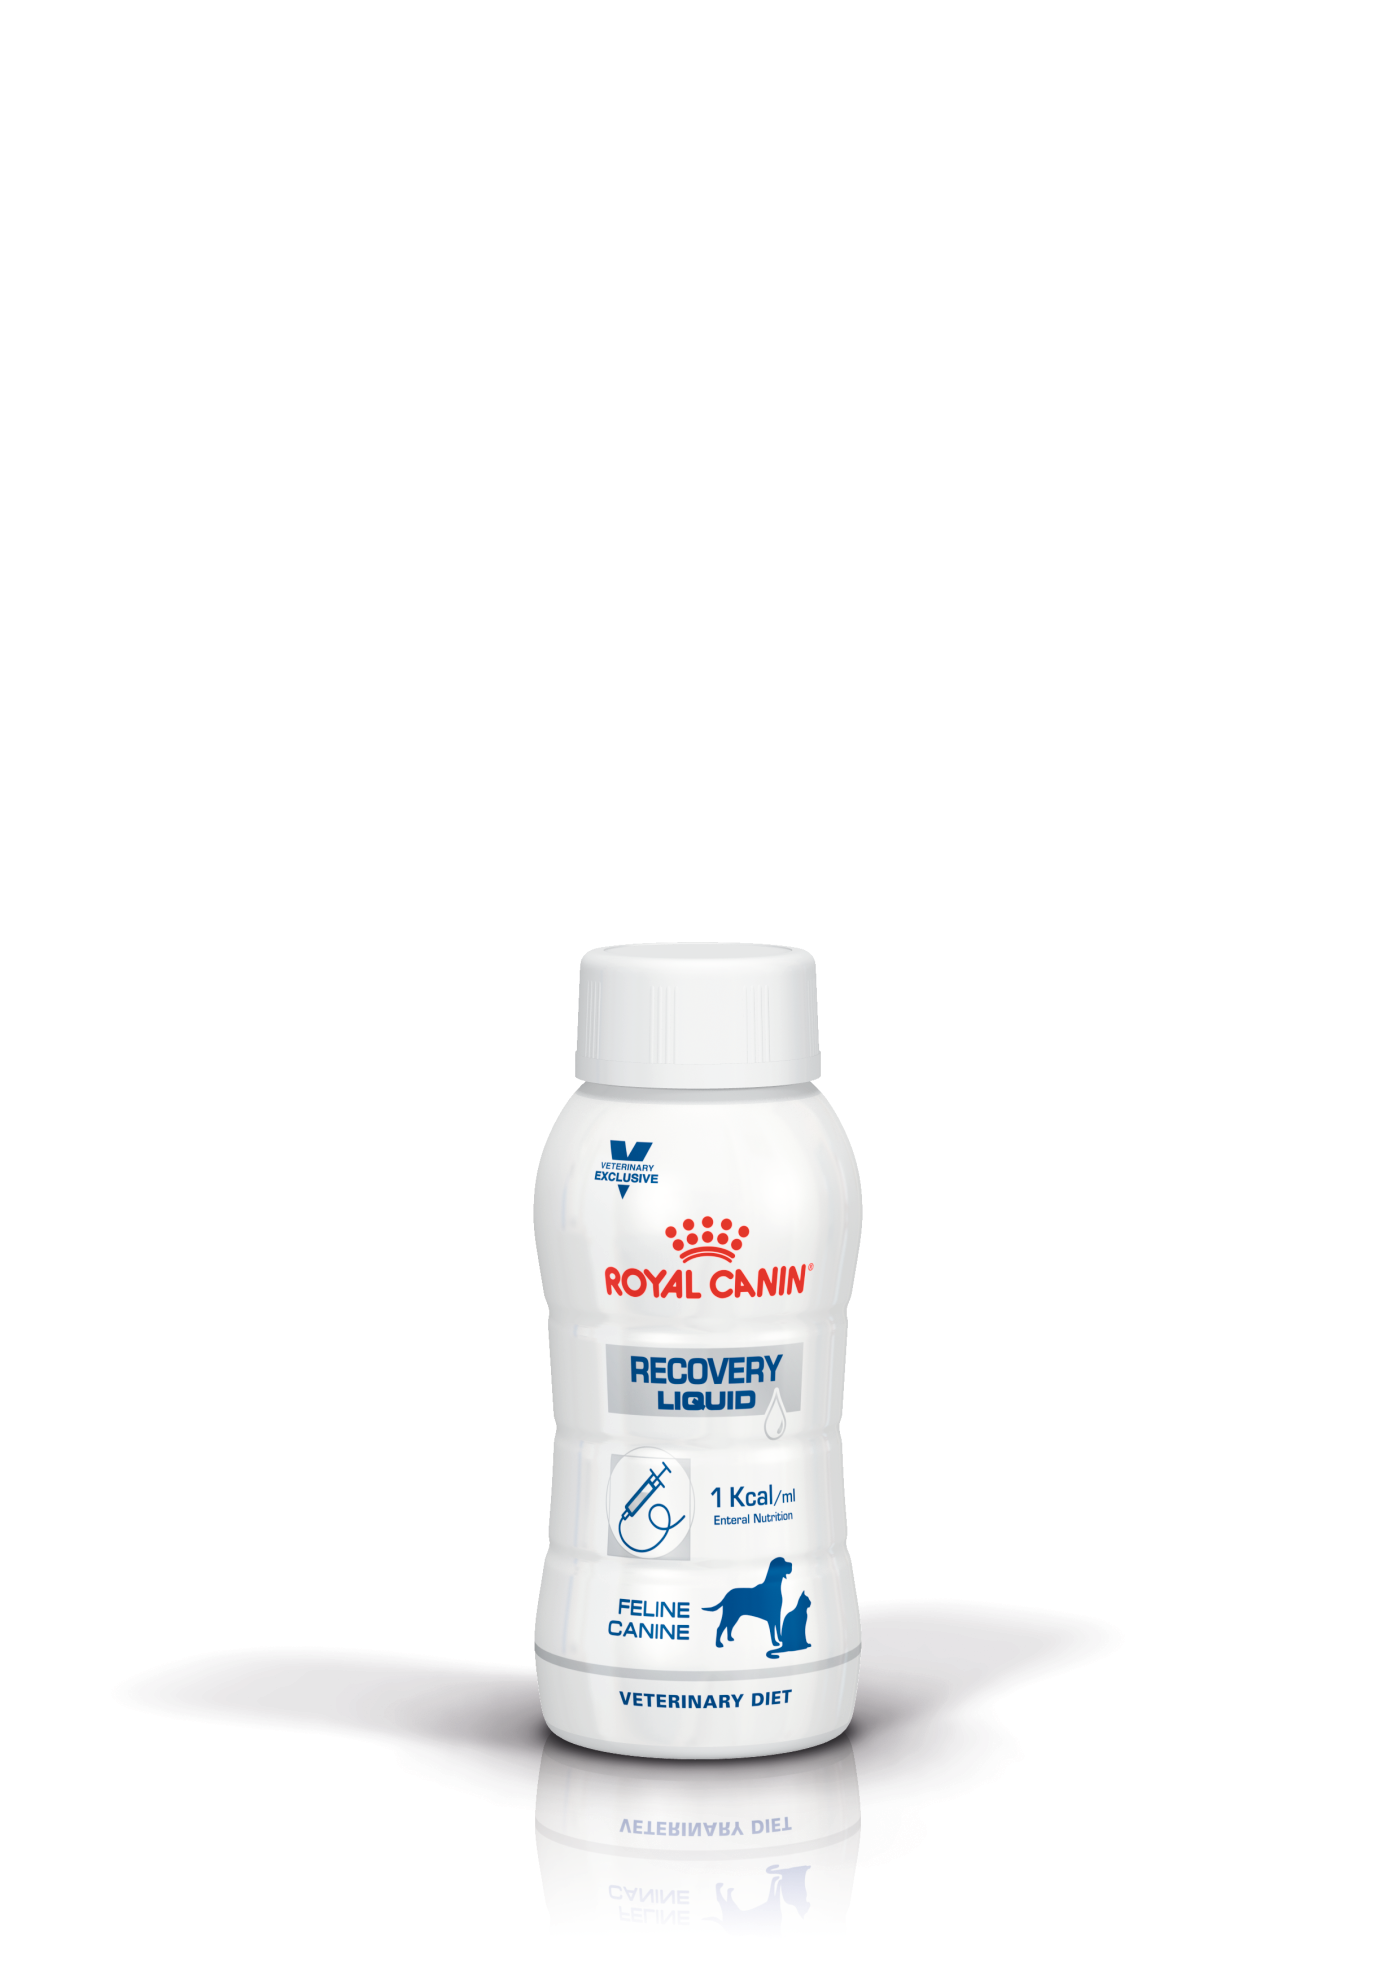 royal canin recovery liquid diet